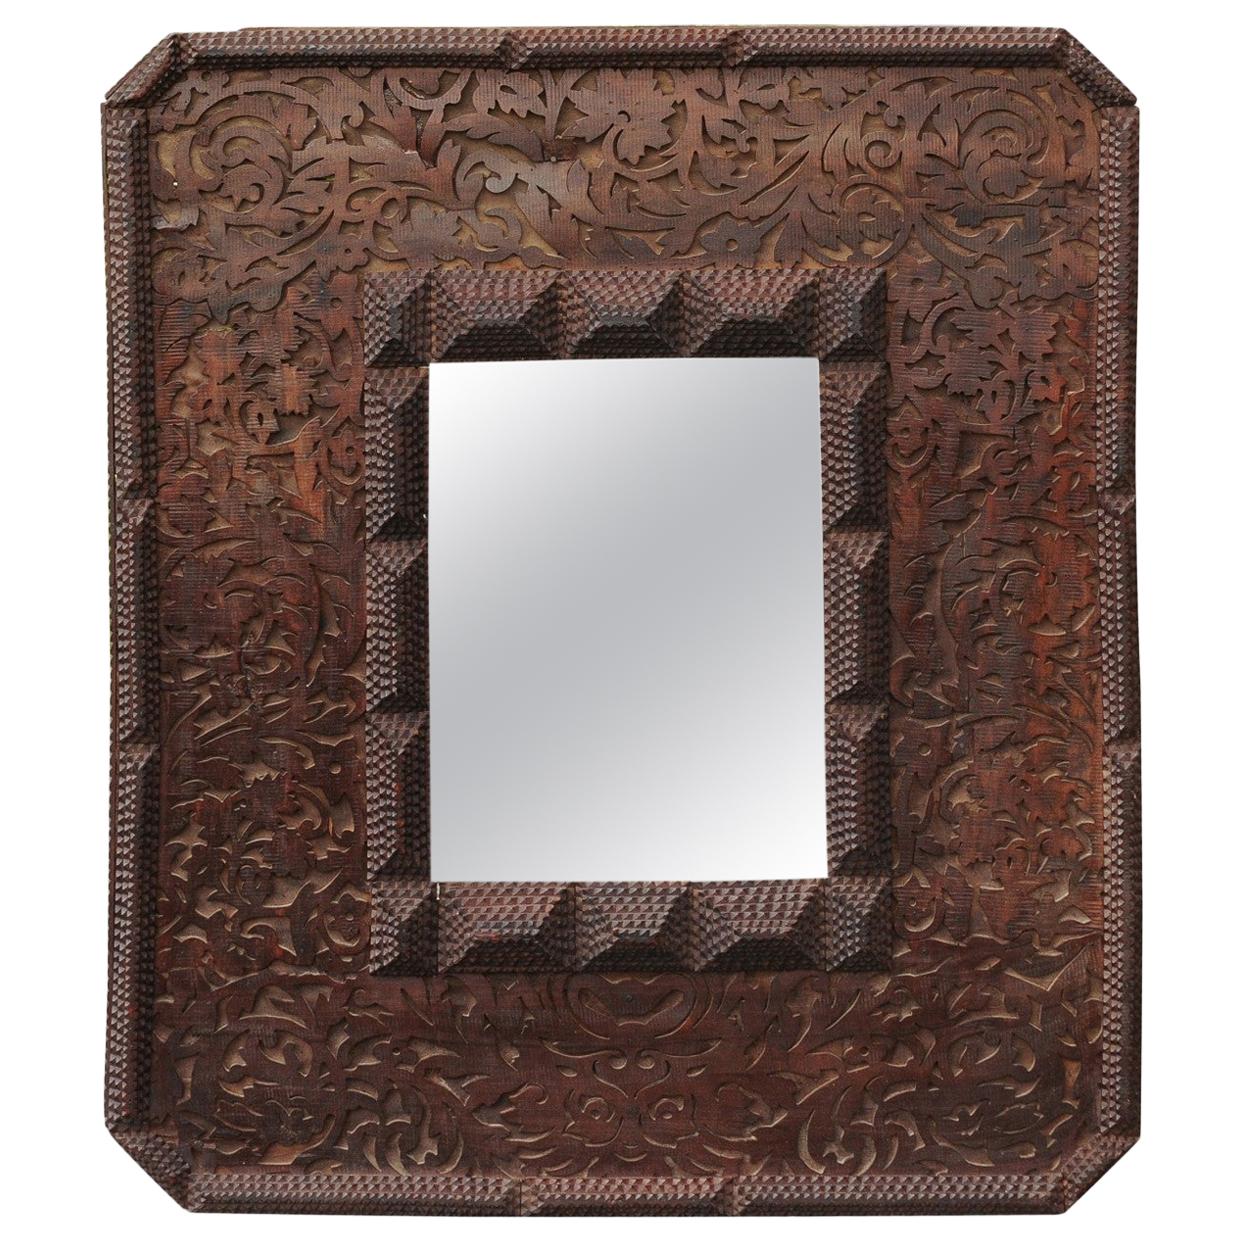 French Tramp Art Brown Wood Mirror with Scrollwork Design and Textured Accents